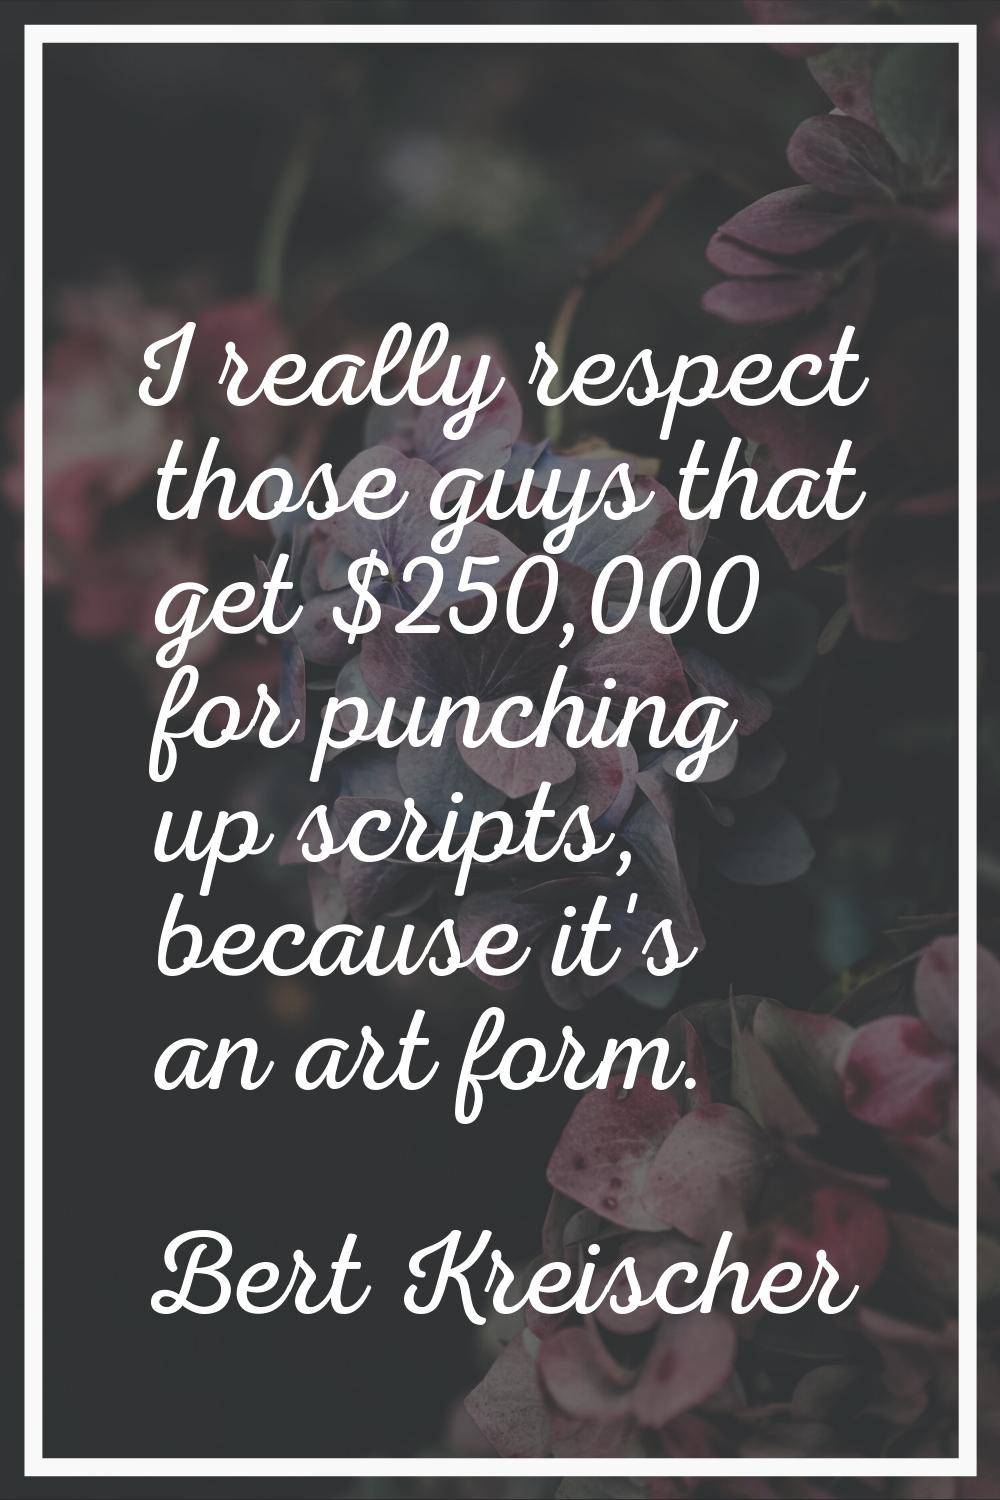 I really respect those guys that get $250,000 for punching up scripts, because it's an art form.